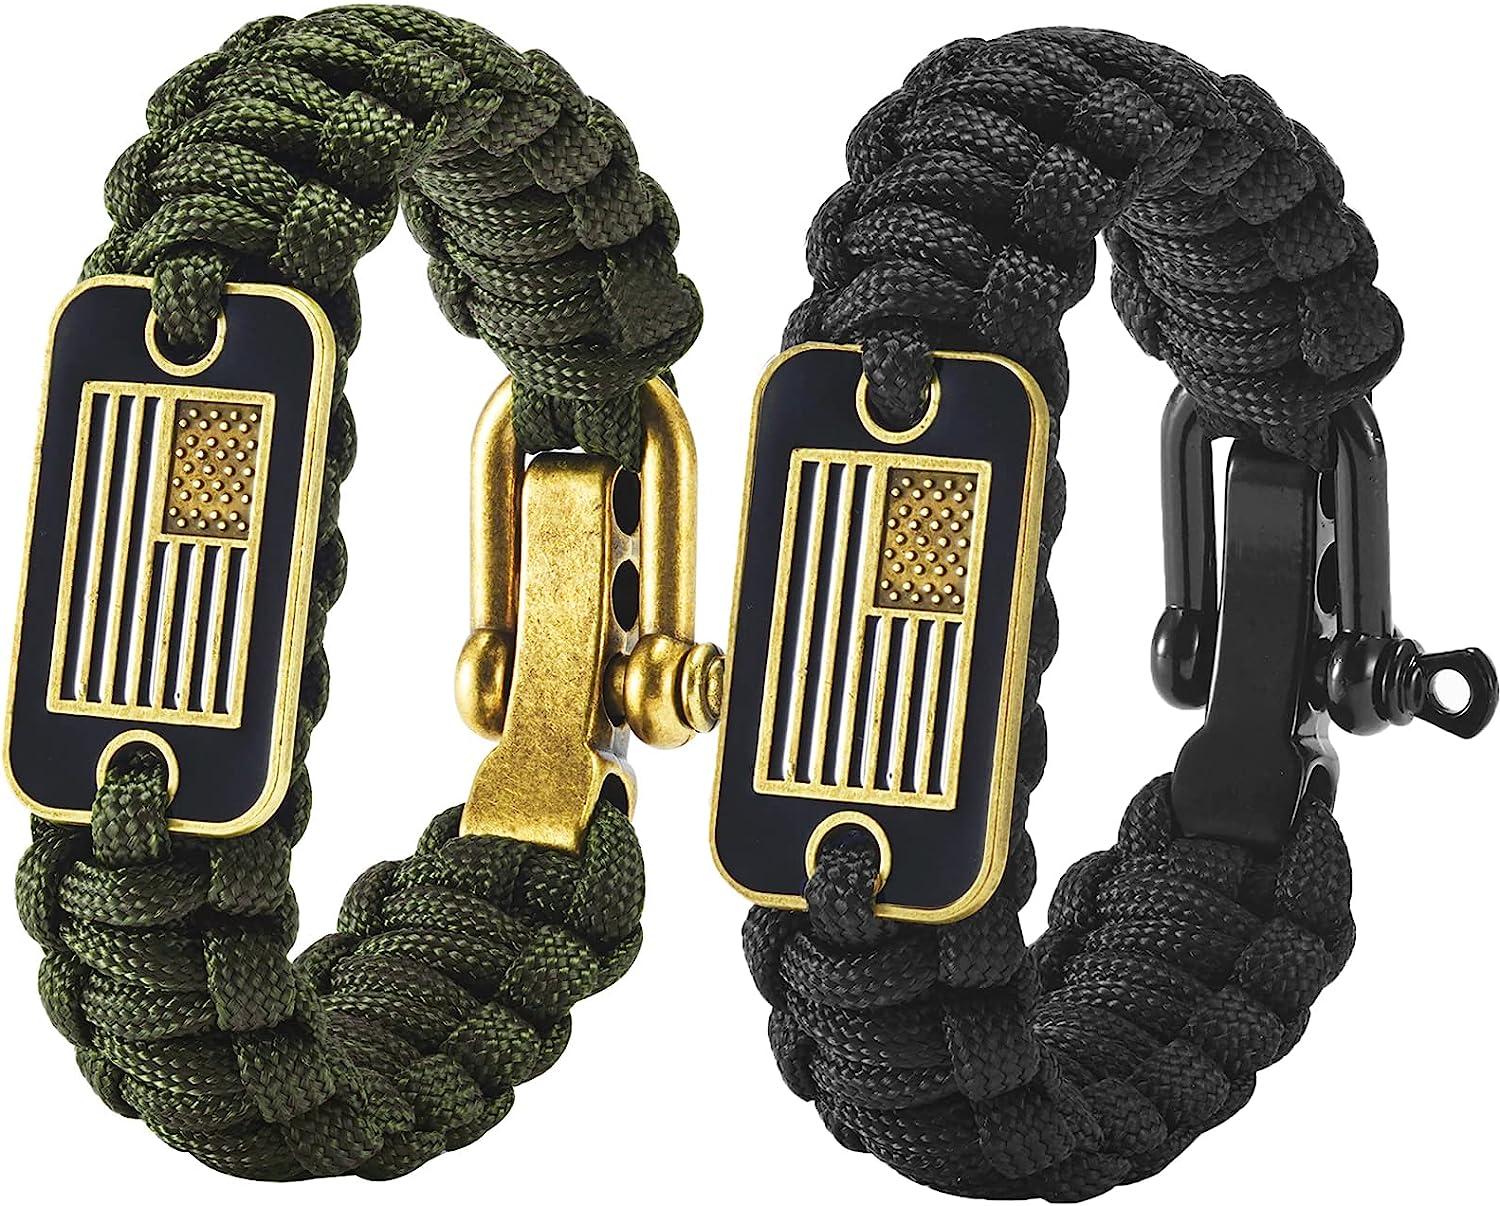 Making Paracord Bracelets for our Troops - Soldiers' Angels